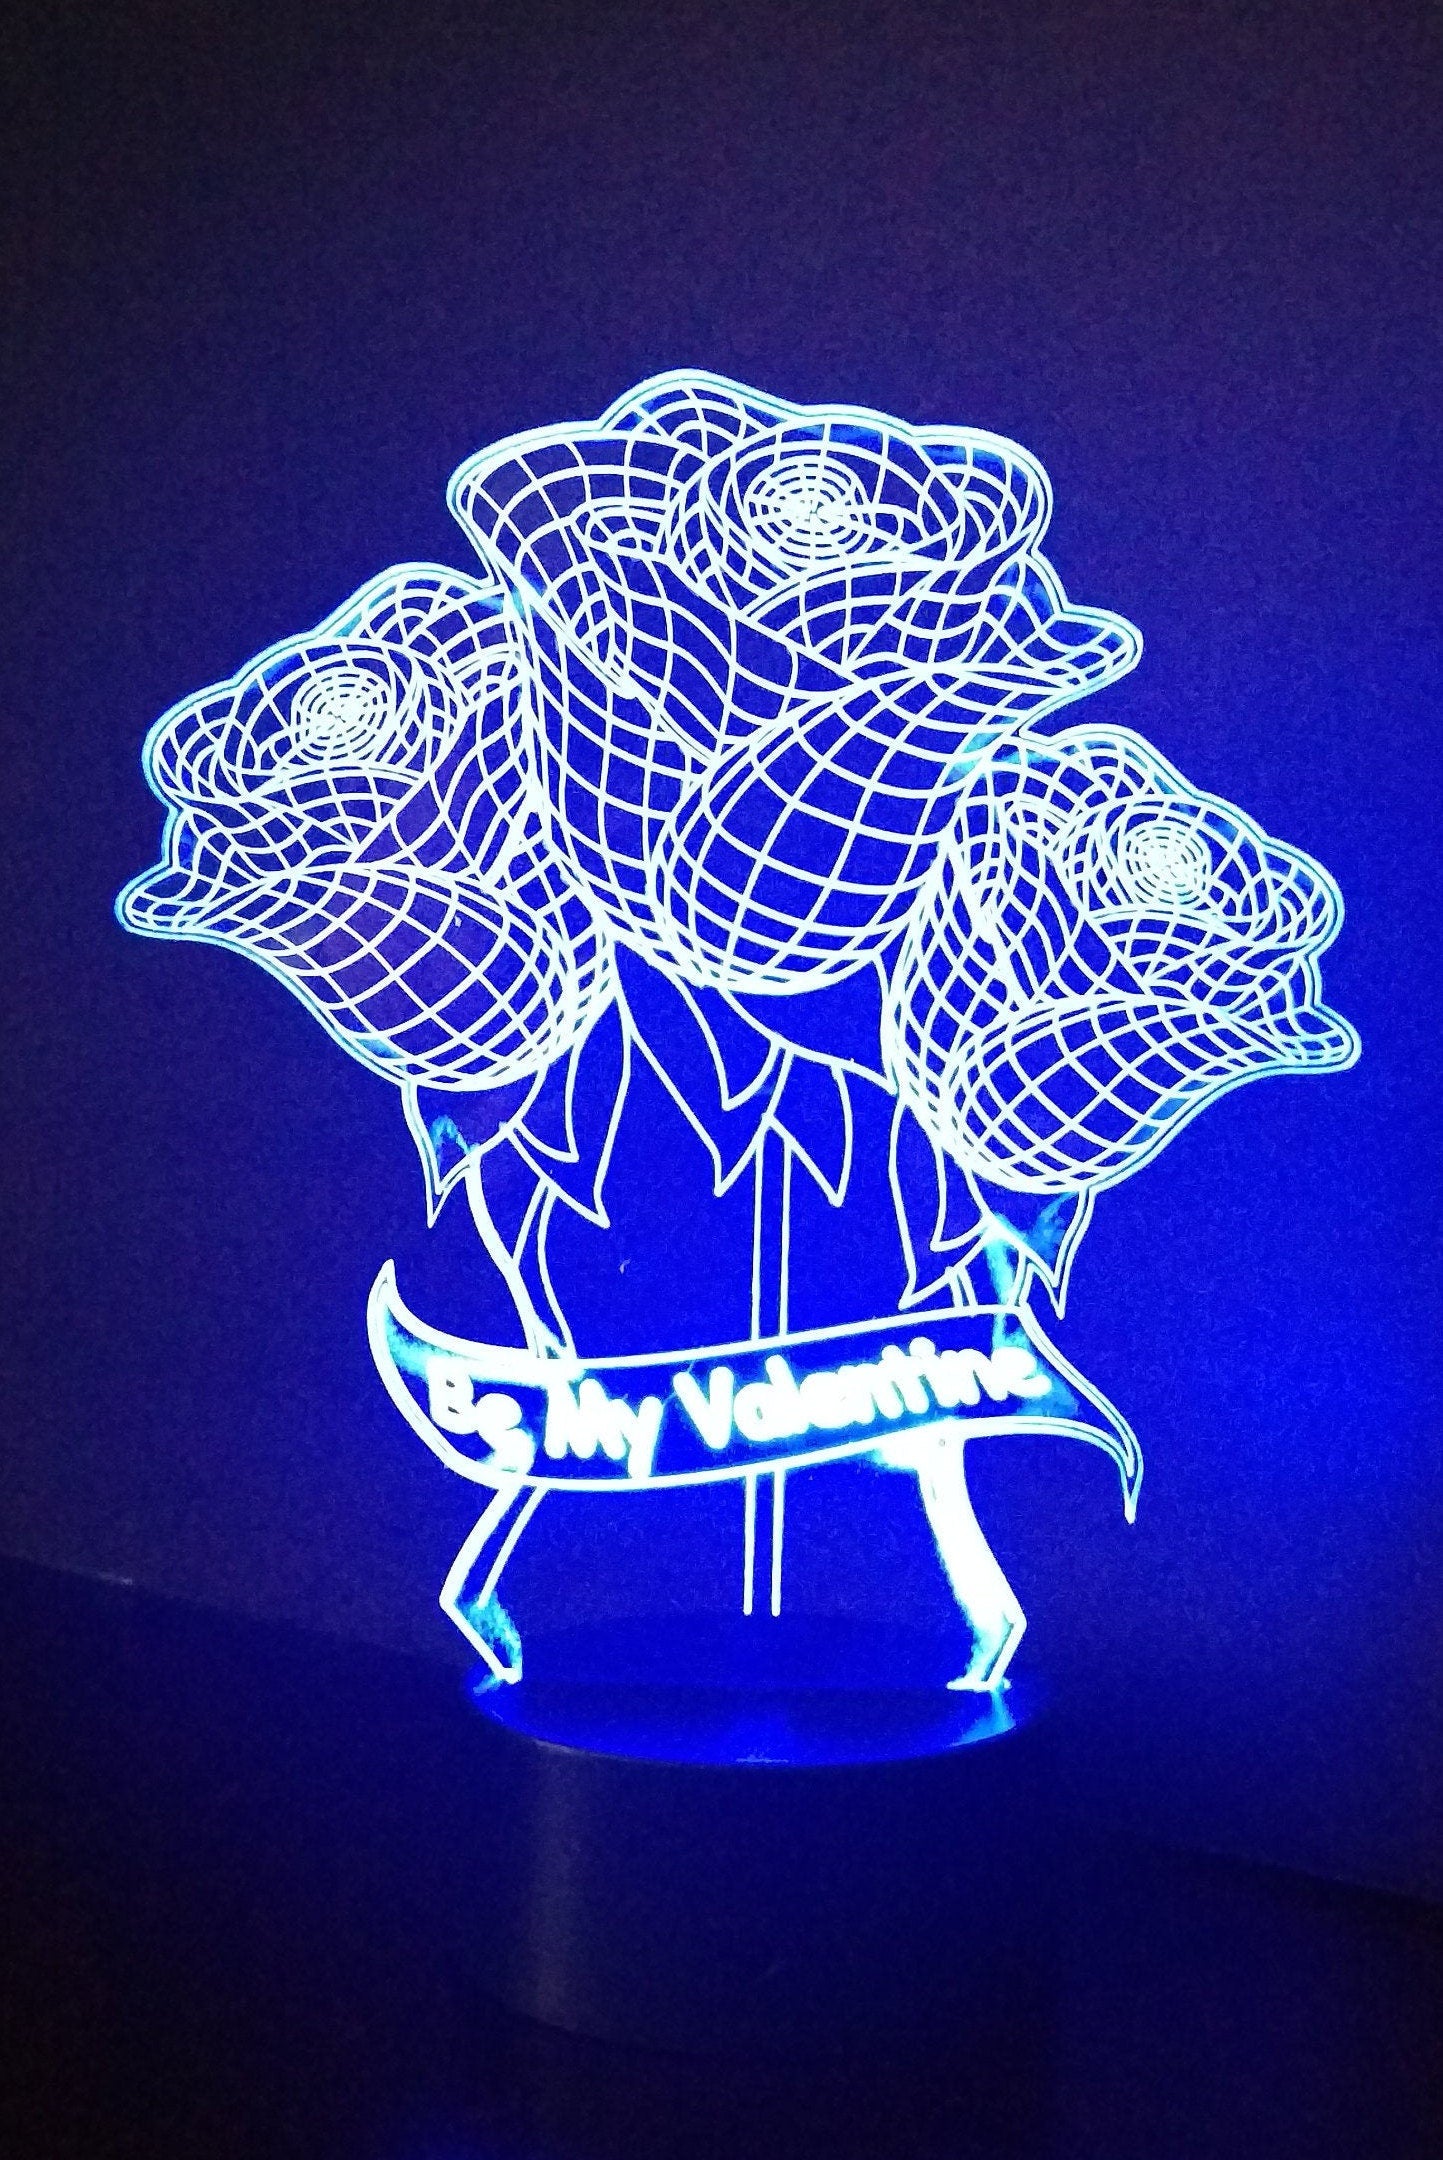 Awesome 3D "Be My Valentine Roses" LED Lamp (1141) - FREE SHIPPING!